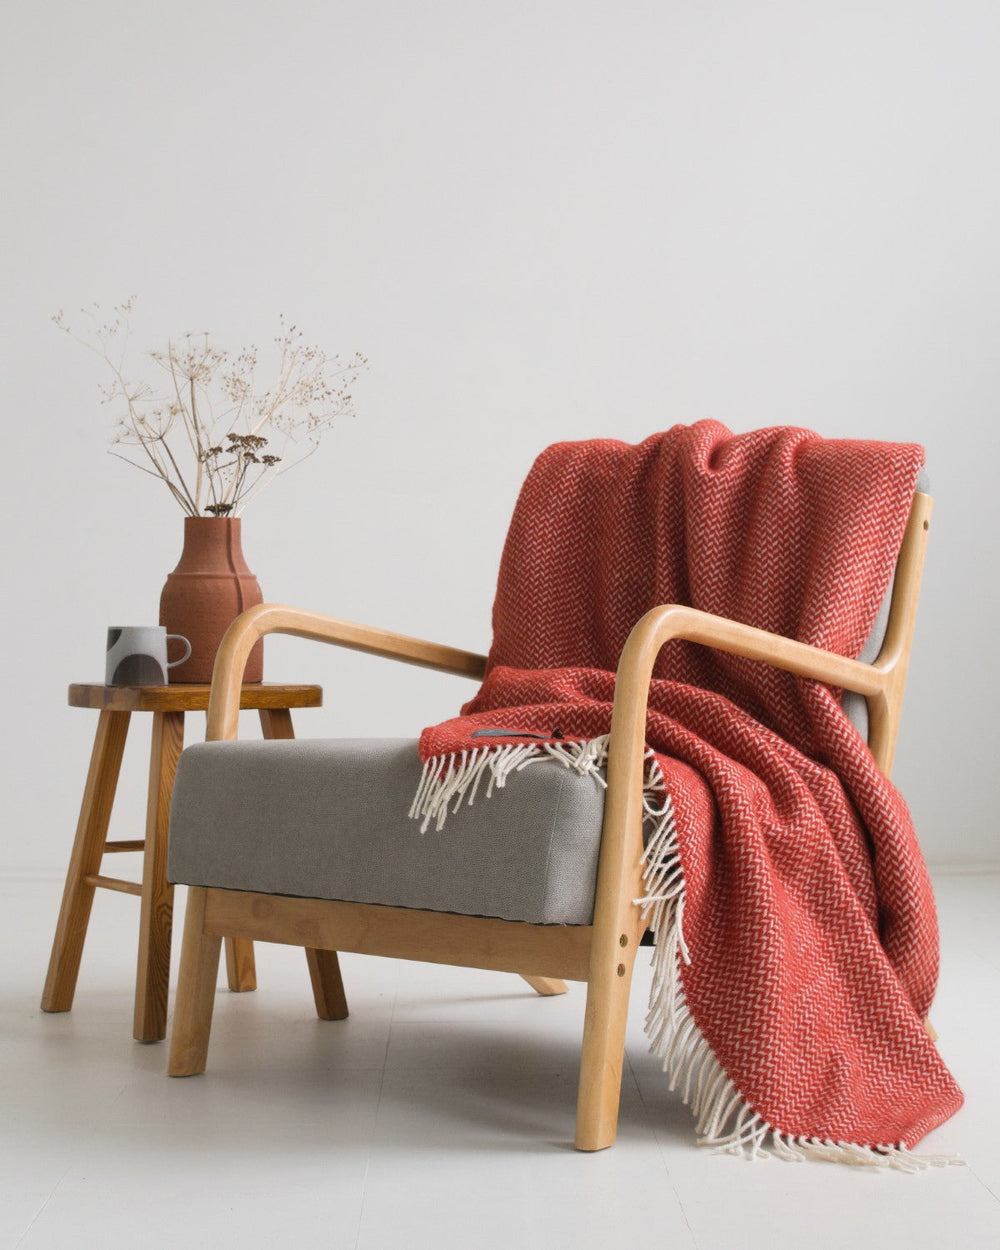 Extra large red herringbone wool blanket draped over a lounge chair